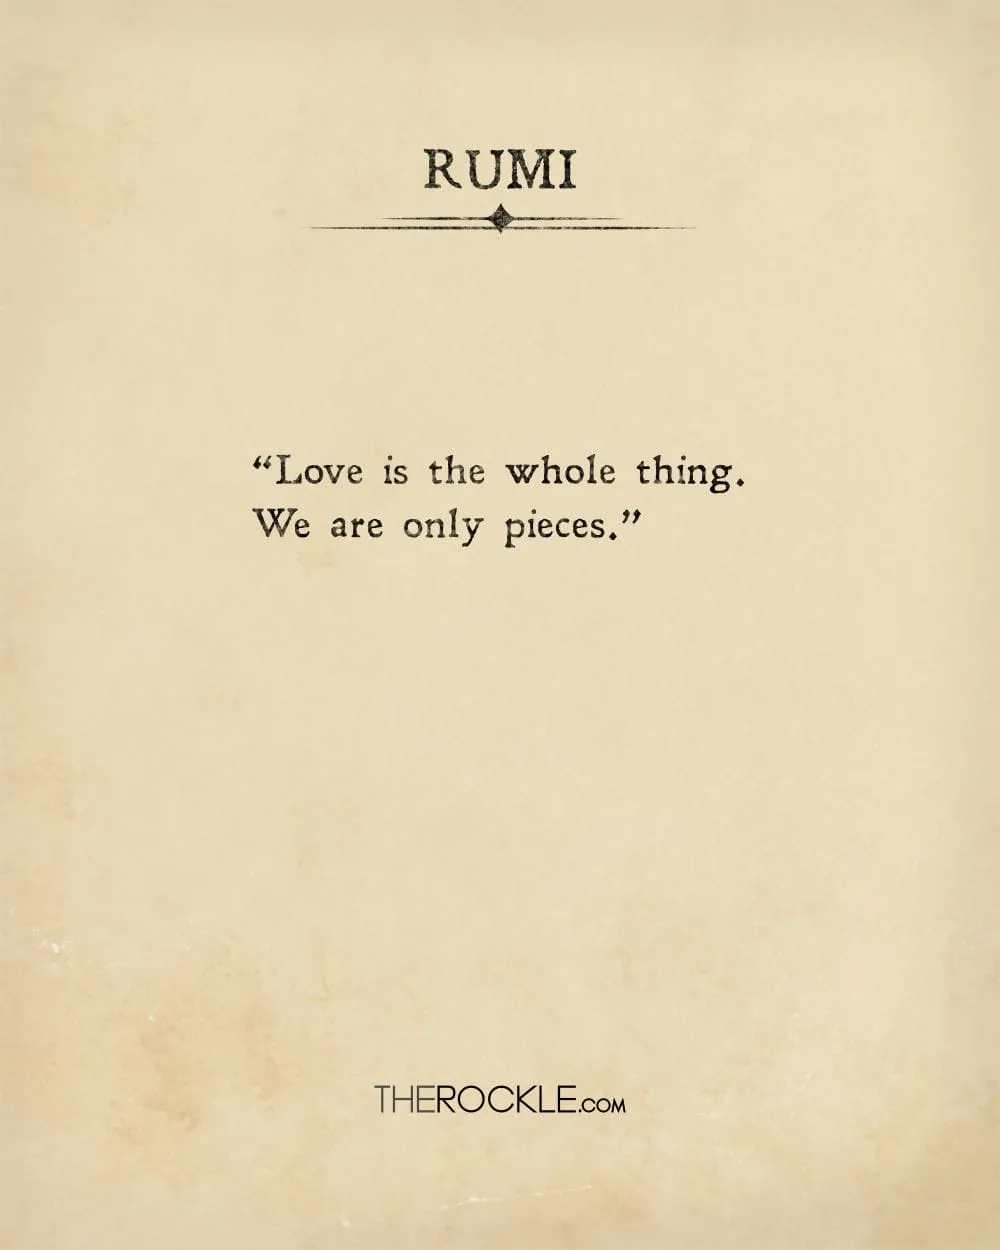 Rumi's quote about love